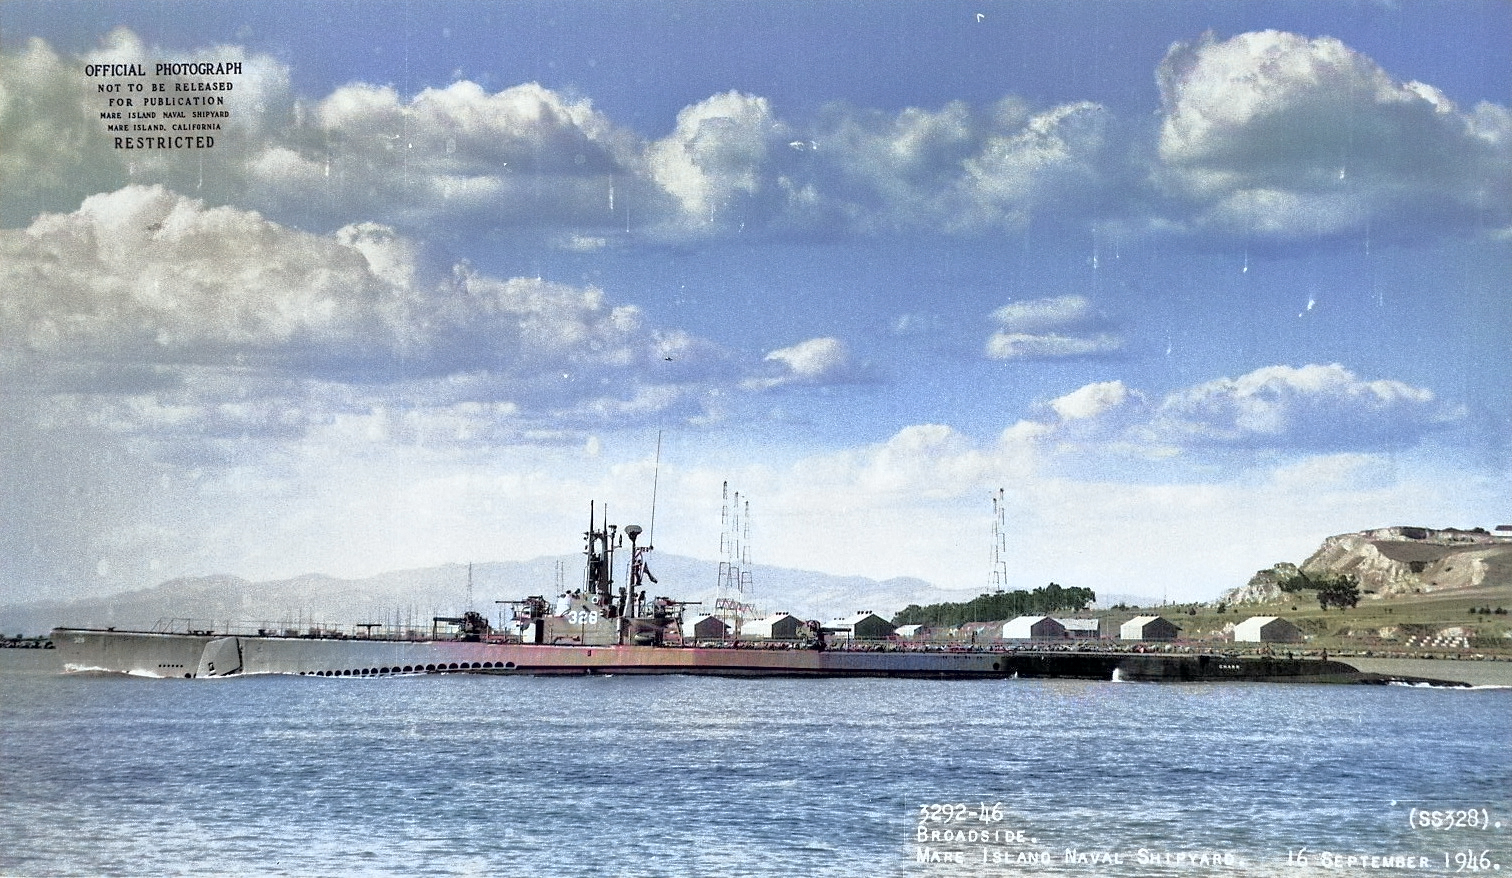 USS Charr off Mare Island Naval Shipyard, California, United States, 16 Sep 1946 [Colorized by WW2DB]